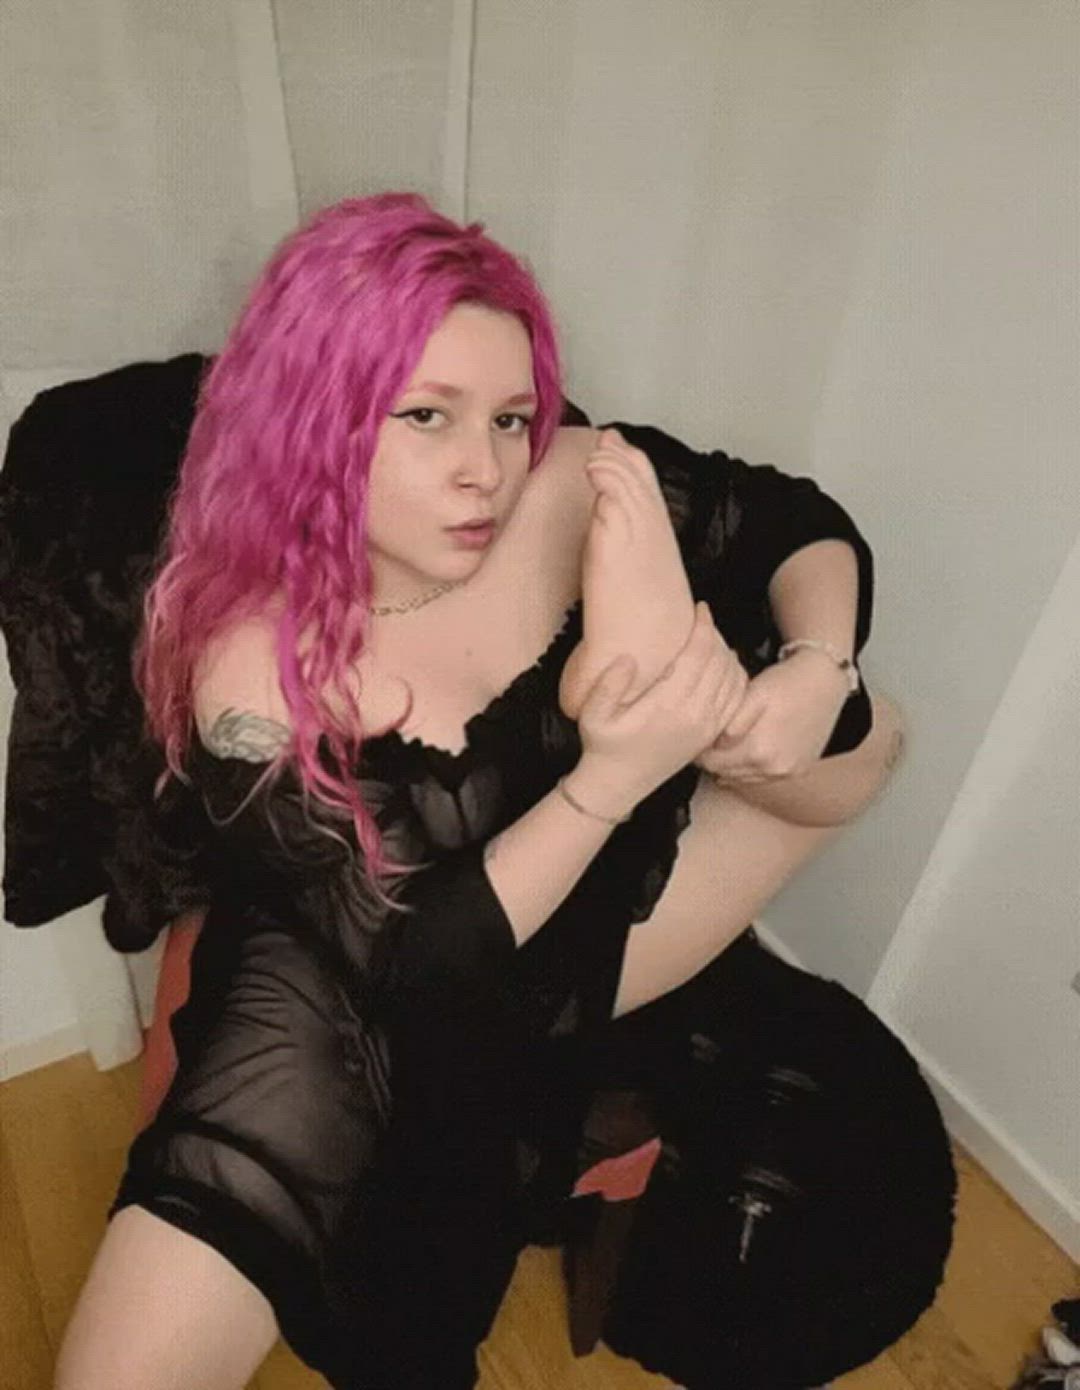 Feet porn video with onlyfans model xmistresslilithx <strong>@xmistresslilithx</strong>